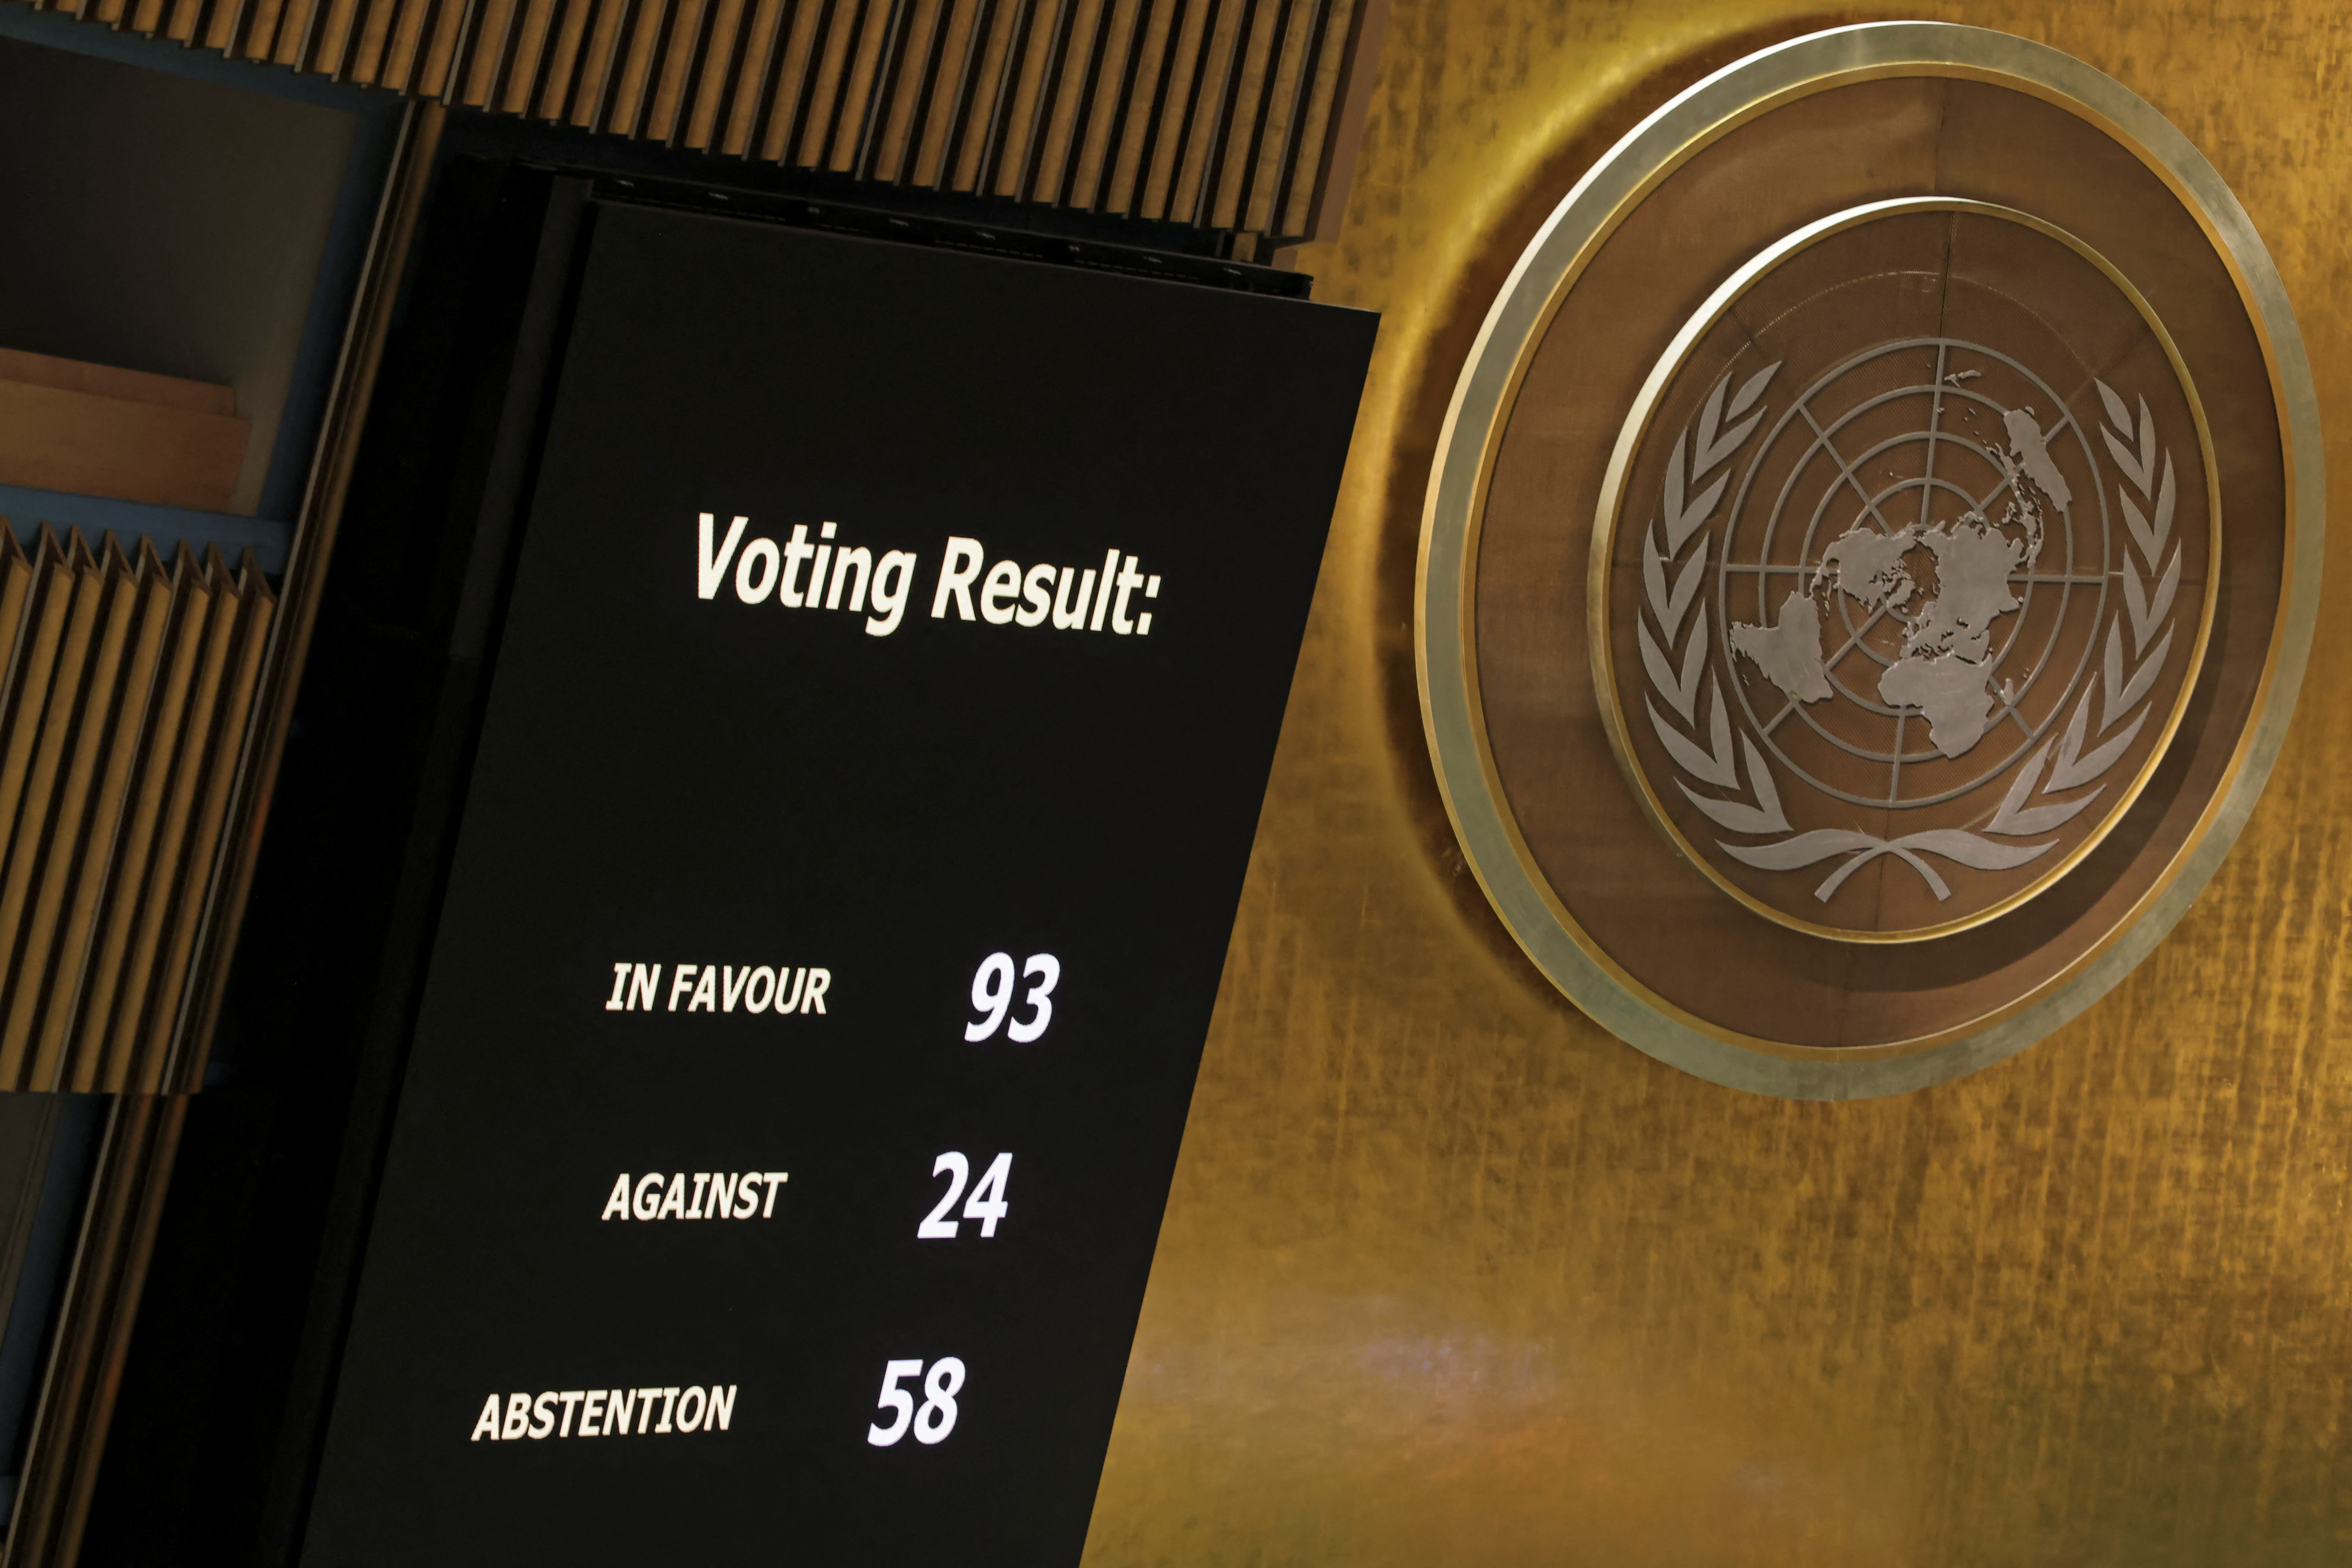 A display shows the results of voting on suspending Russia from the United Nations Human Rights Council during an emergency special session of the UN General Assembly on Russia's invasion of Ukraine, at the United Nations headquarters in New York City, United States.